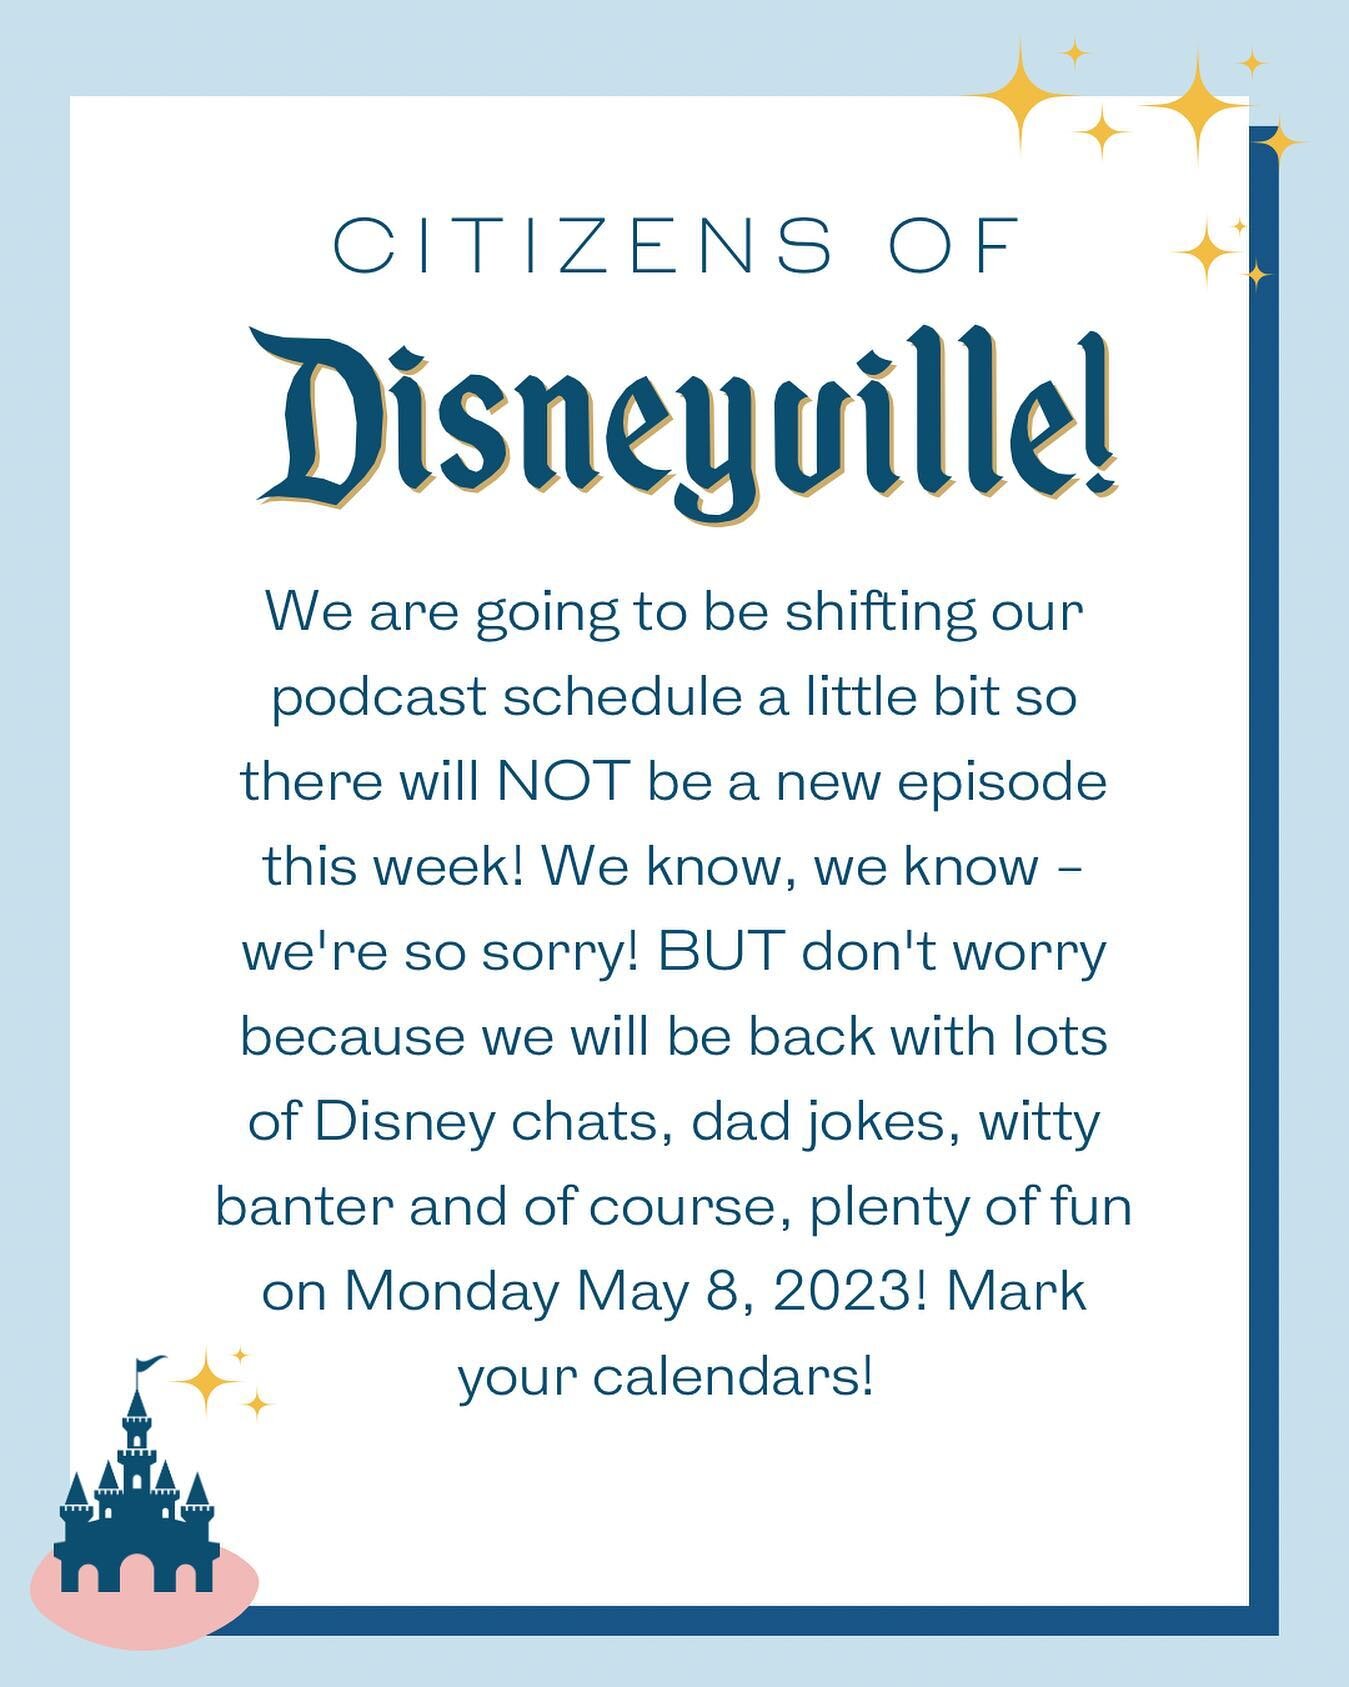 Attention citizens of Disneyville! 📣 

We just wanted to let you know that our podcast schedule will be shifting a bit so there will NOT be a new episode this coming week! 

With our recent travels, our filming and editing schedules got turned upsid